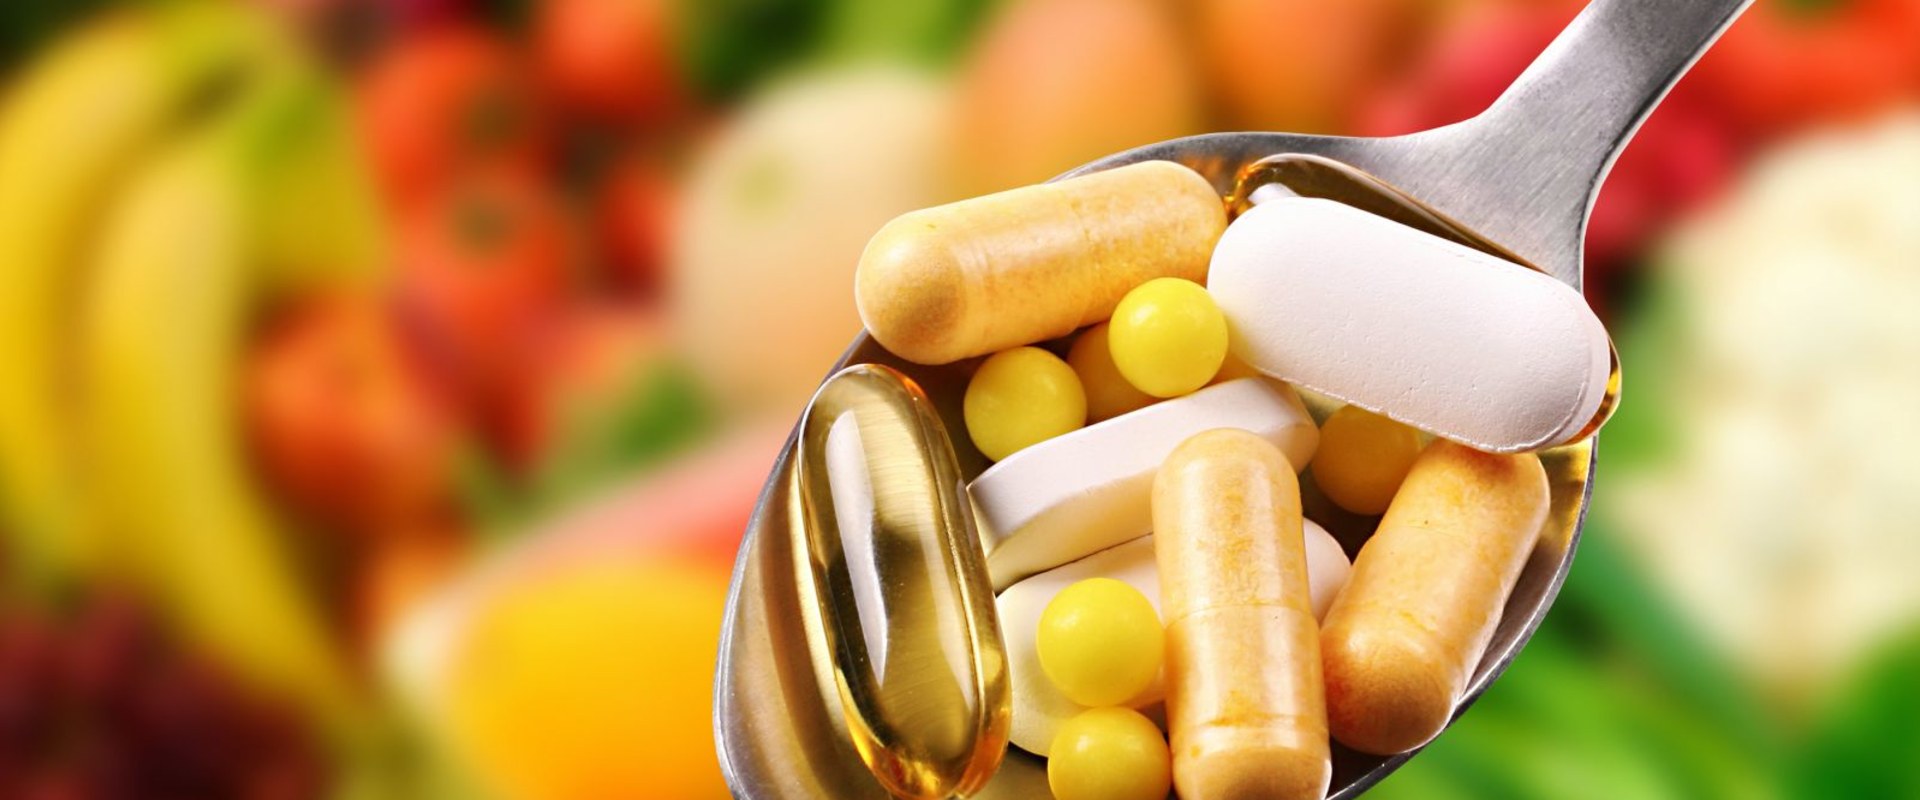 How to Store Dietary Supplements for Maximum Safety and Effectiveness